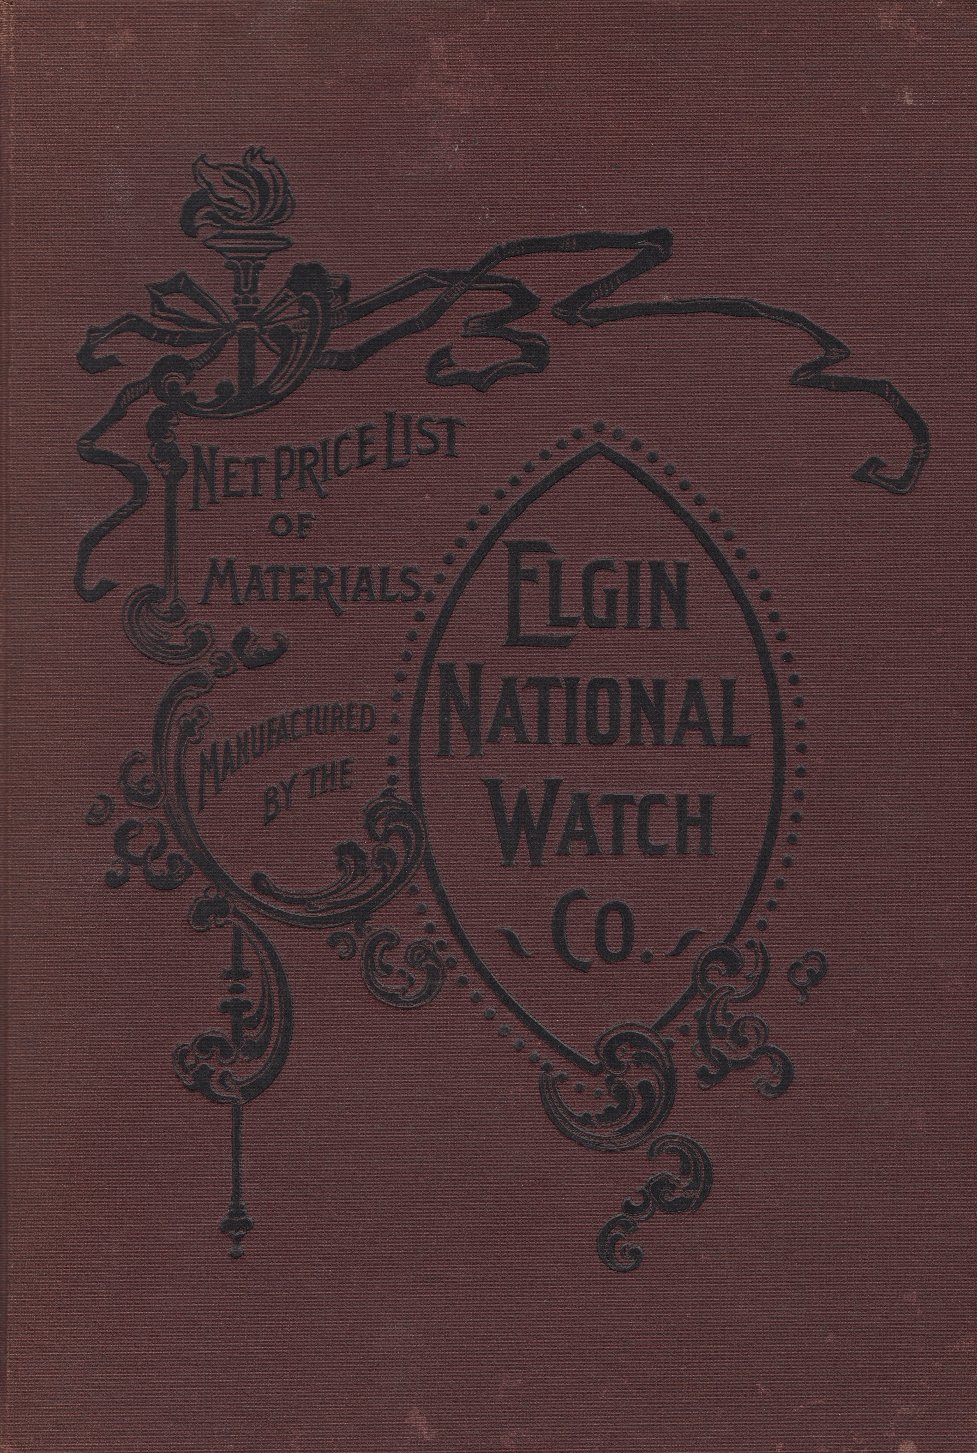 Net Price List of Materials Manufactured by the Elgin National Watch Co. (1896) Cover Image